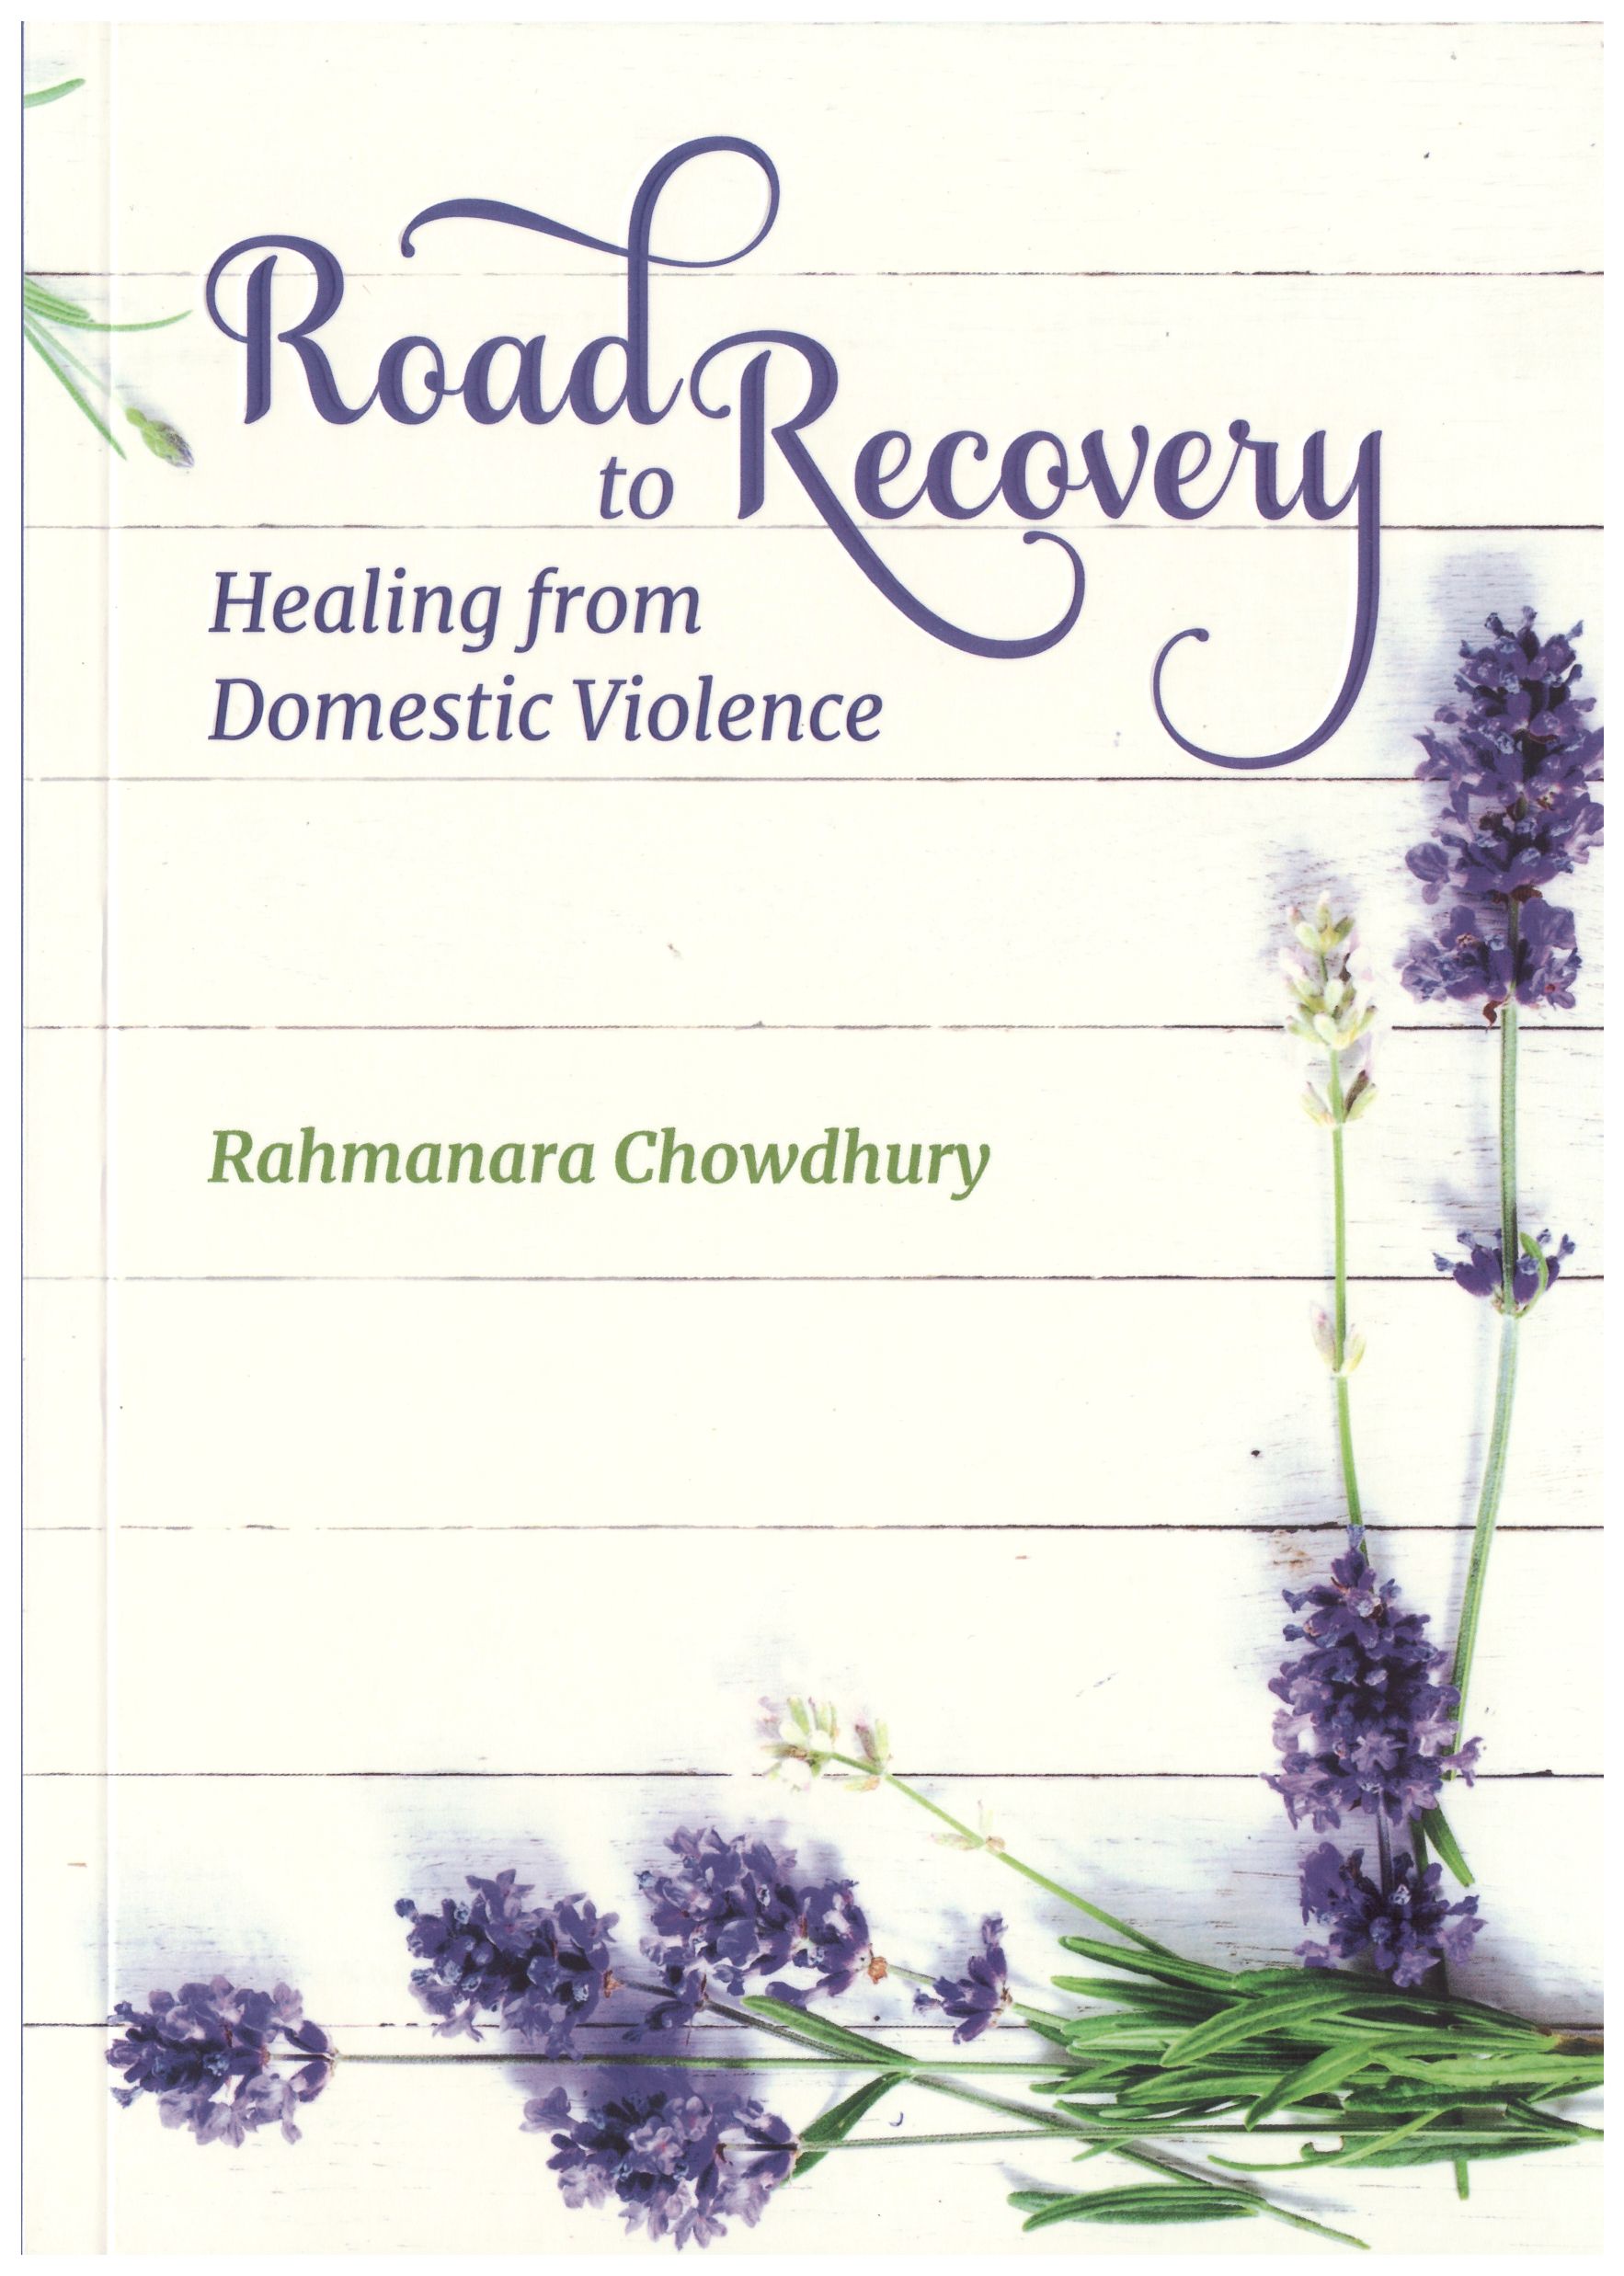 Road to Recovery Healing from Domestic Violence